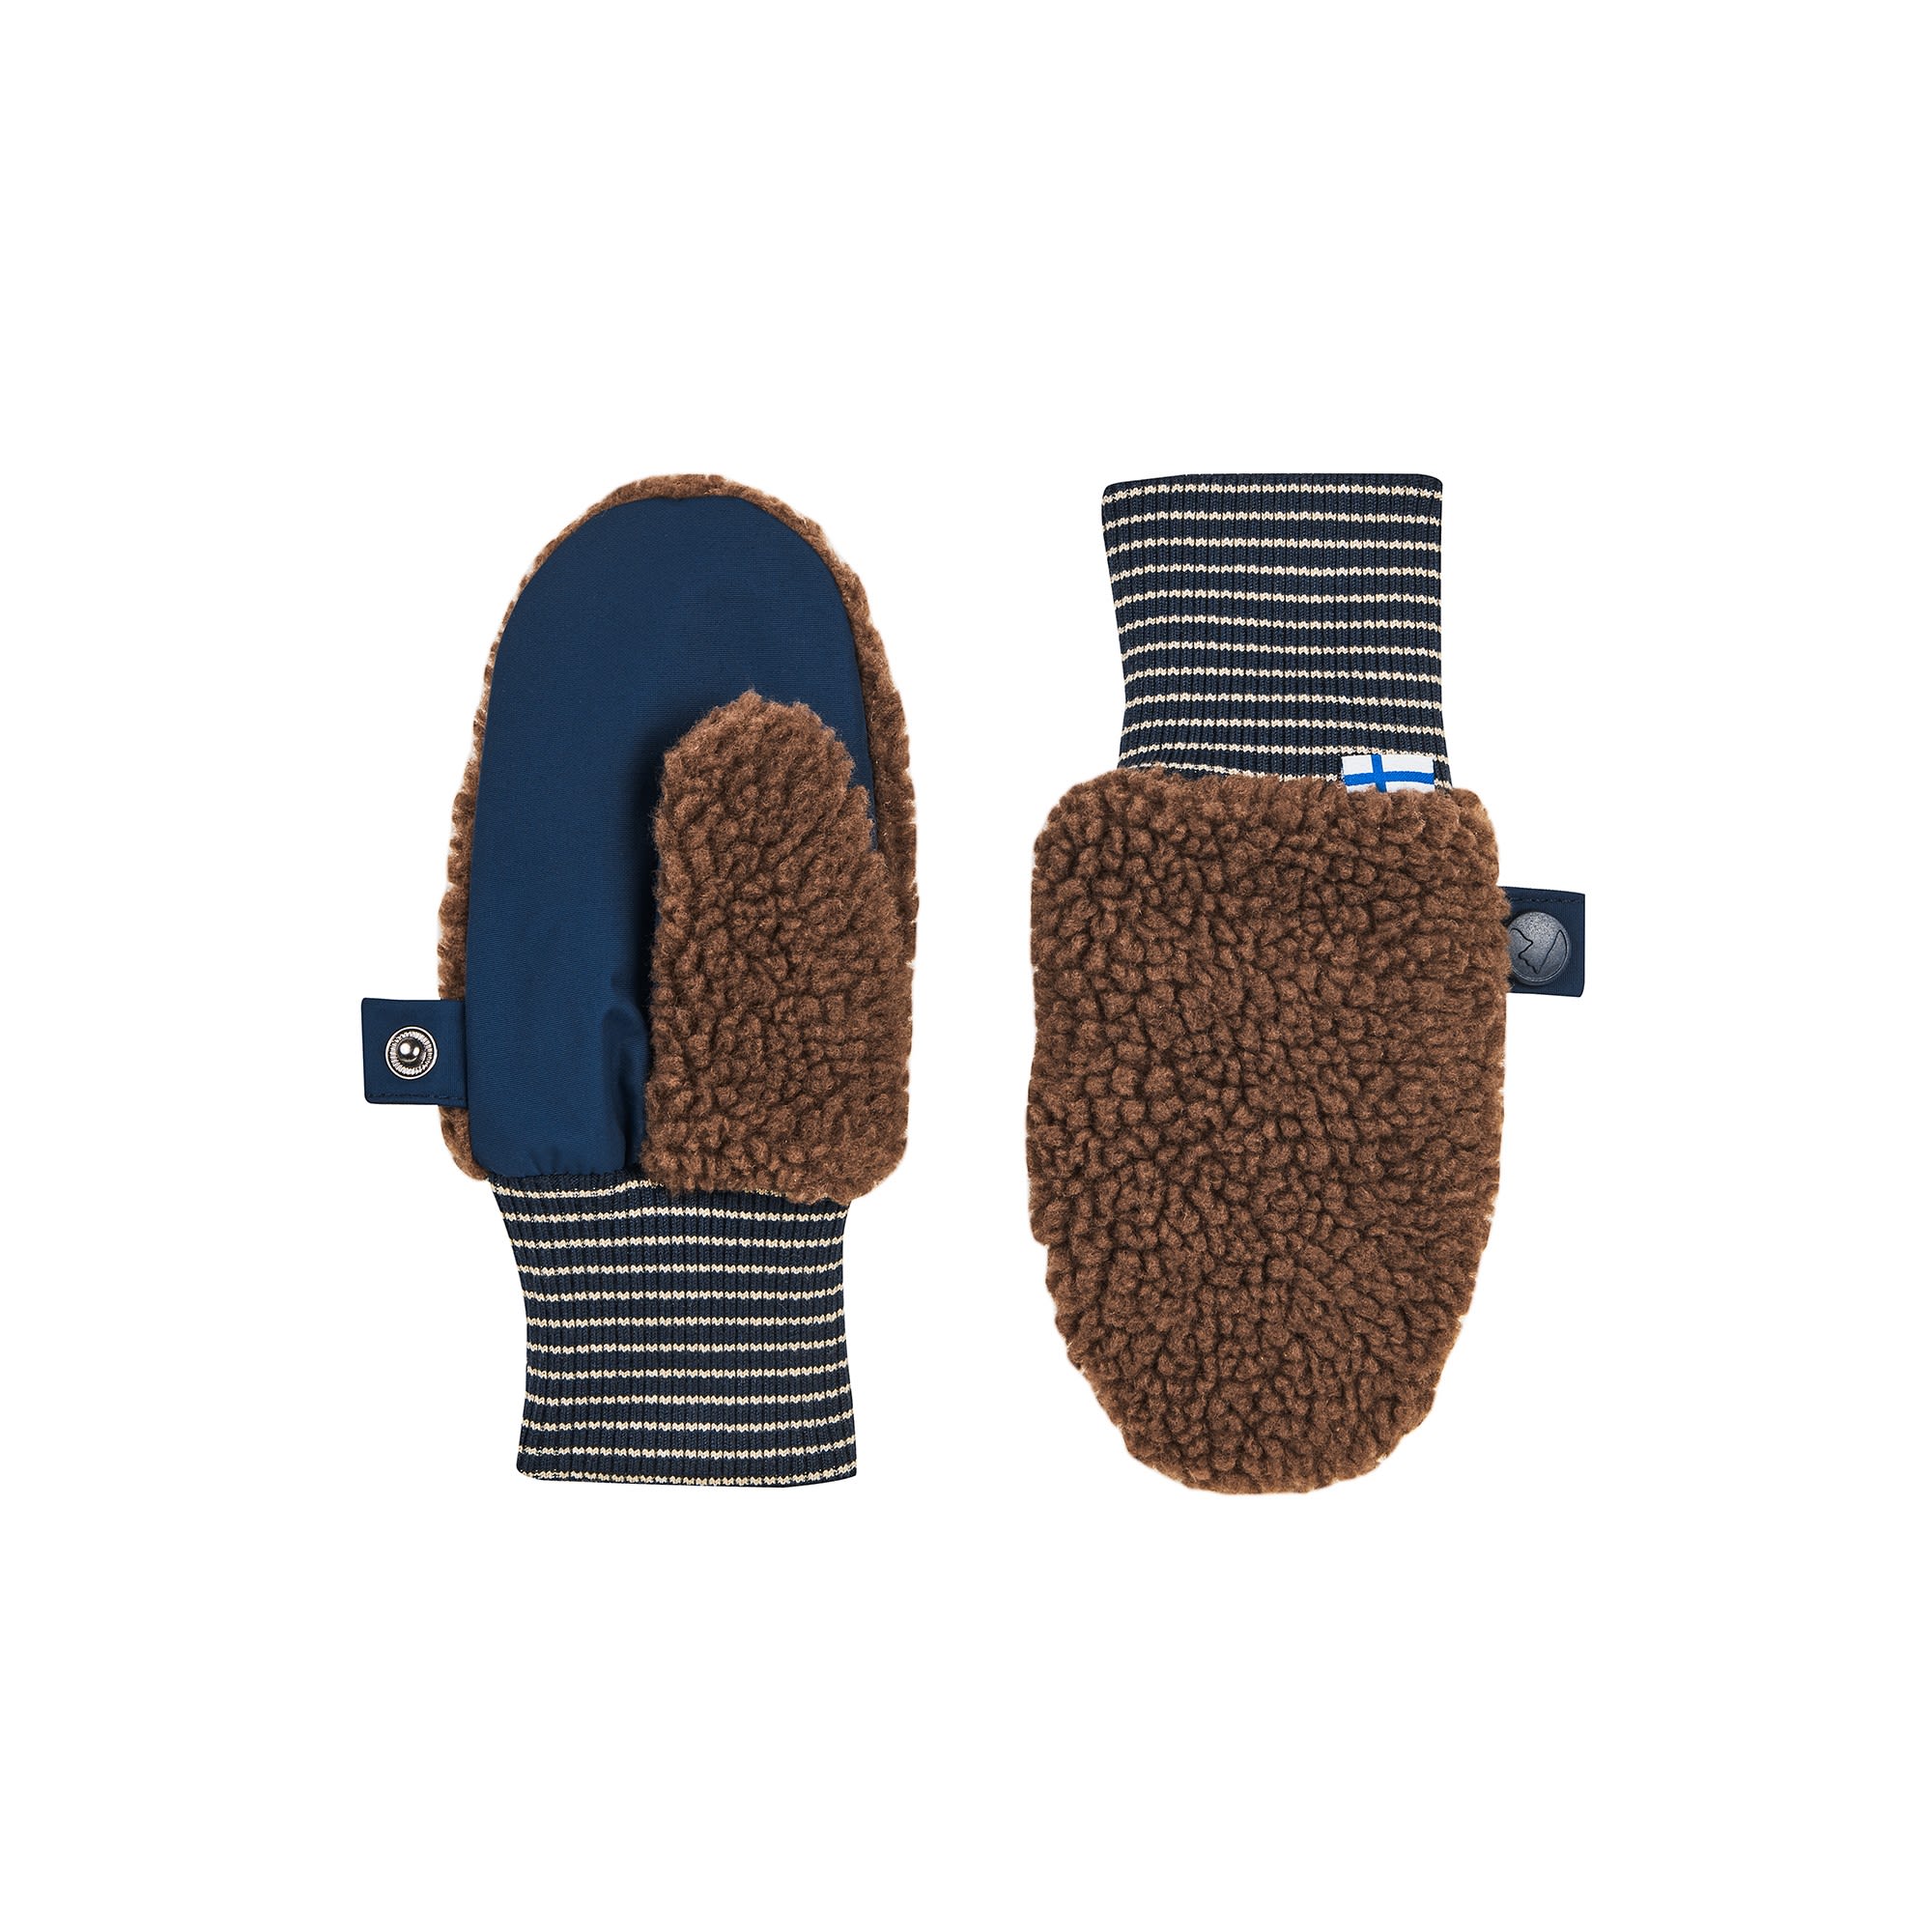 Finkid Nupujussi Teddy (Vorgngermodell) Braun- Fausthandschuhe- Grsse M - Farbe Cocoa - Navy